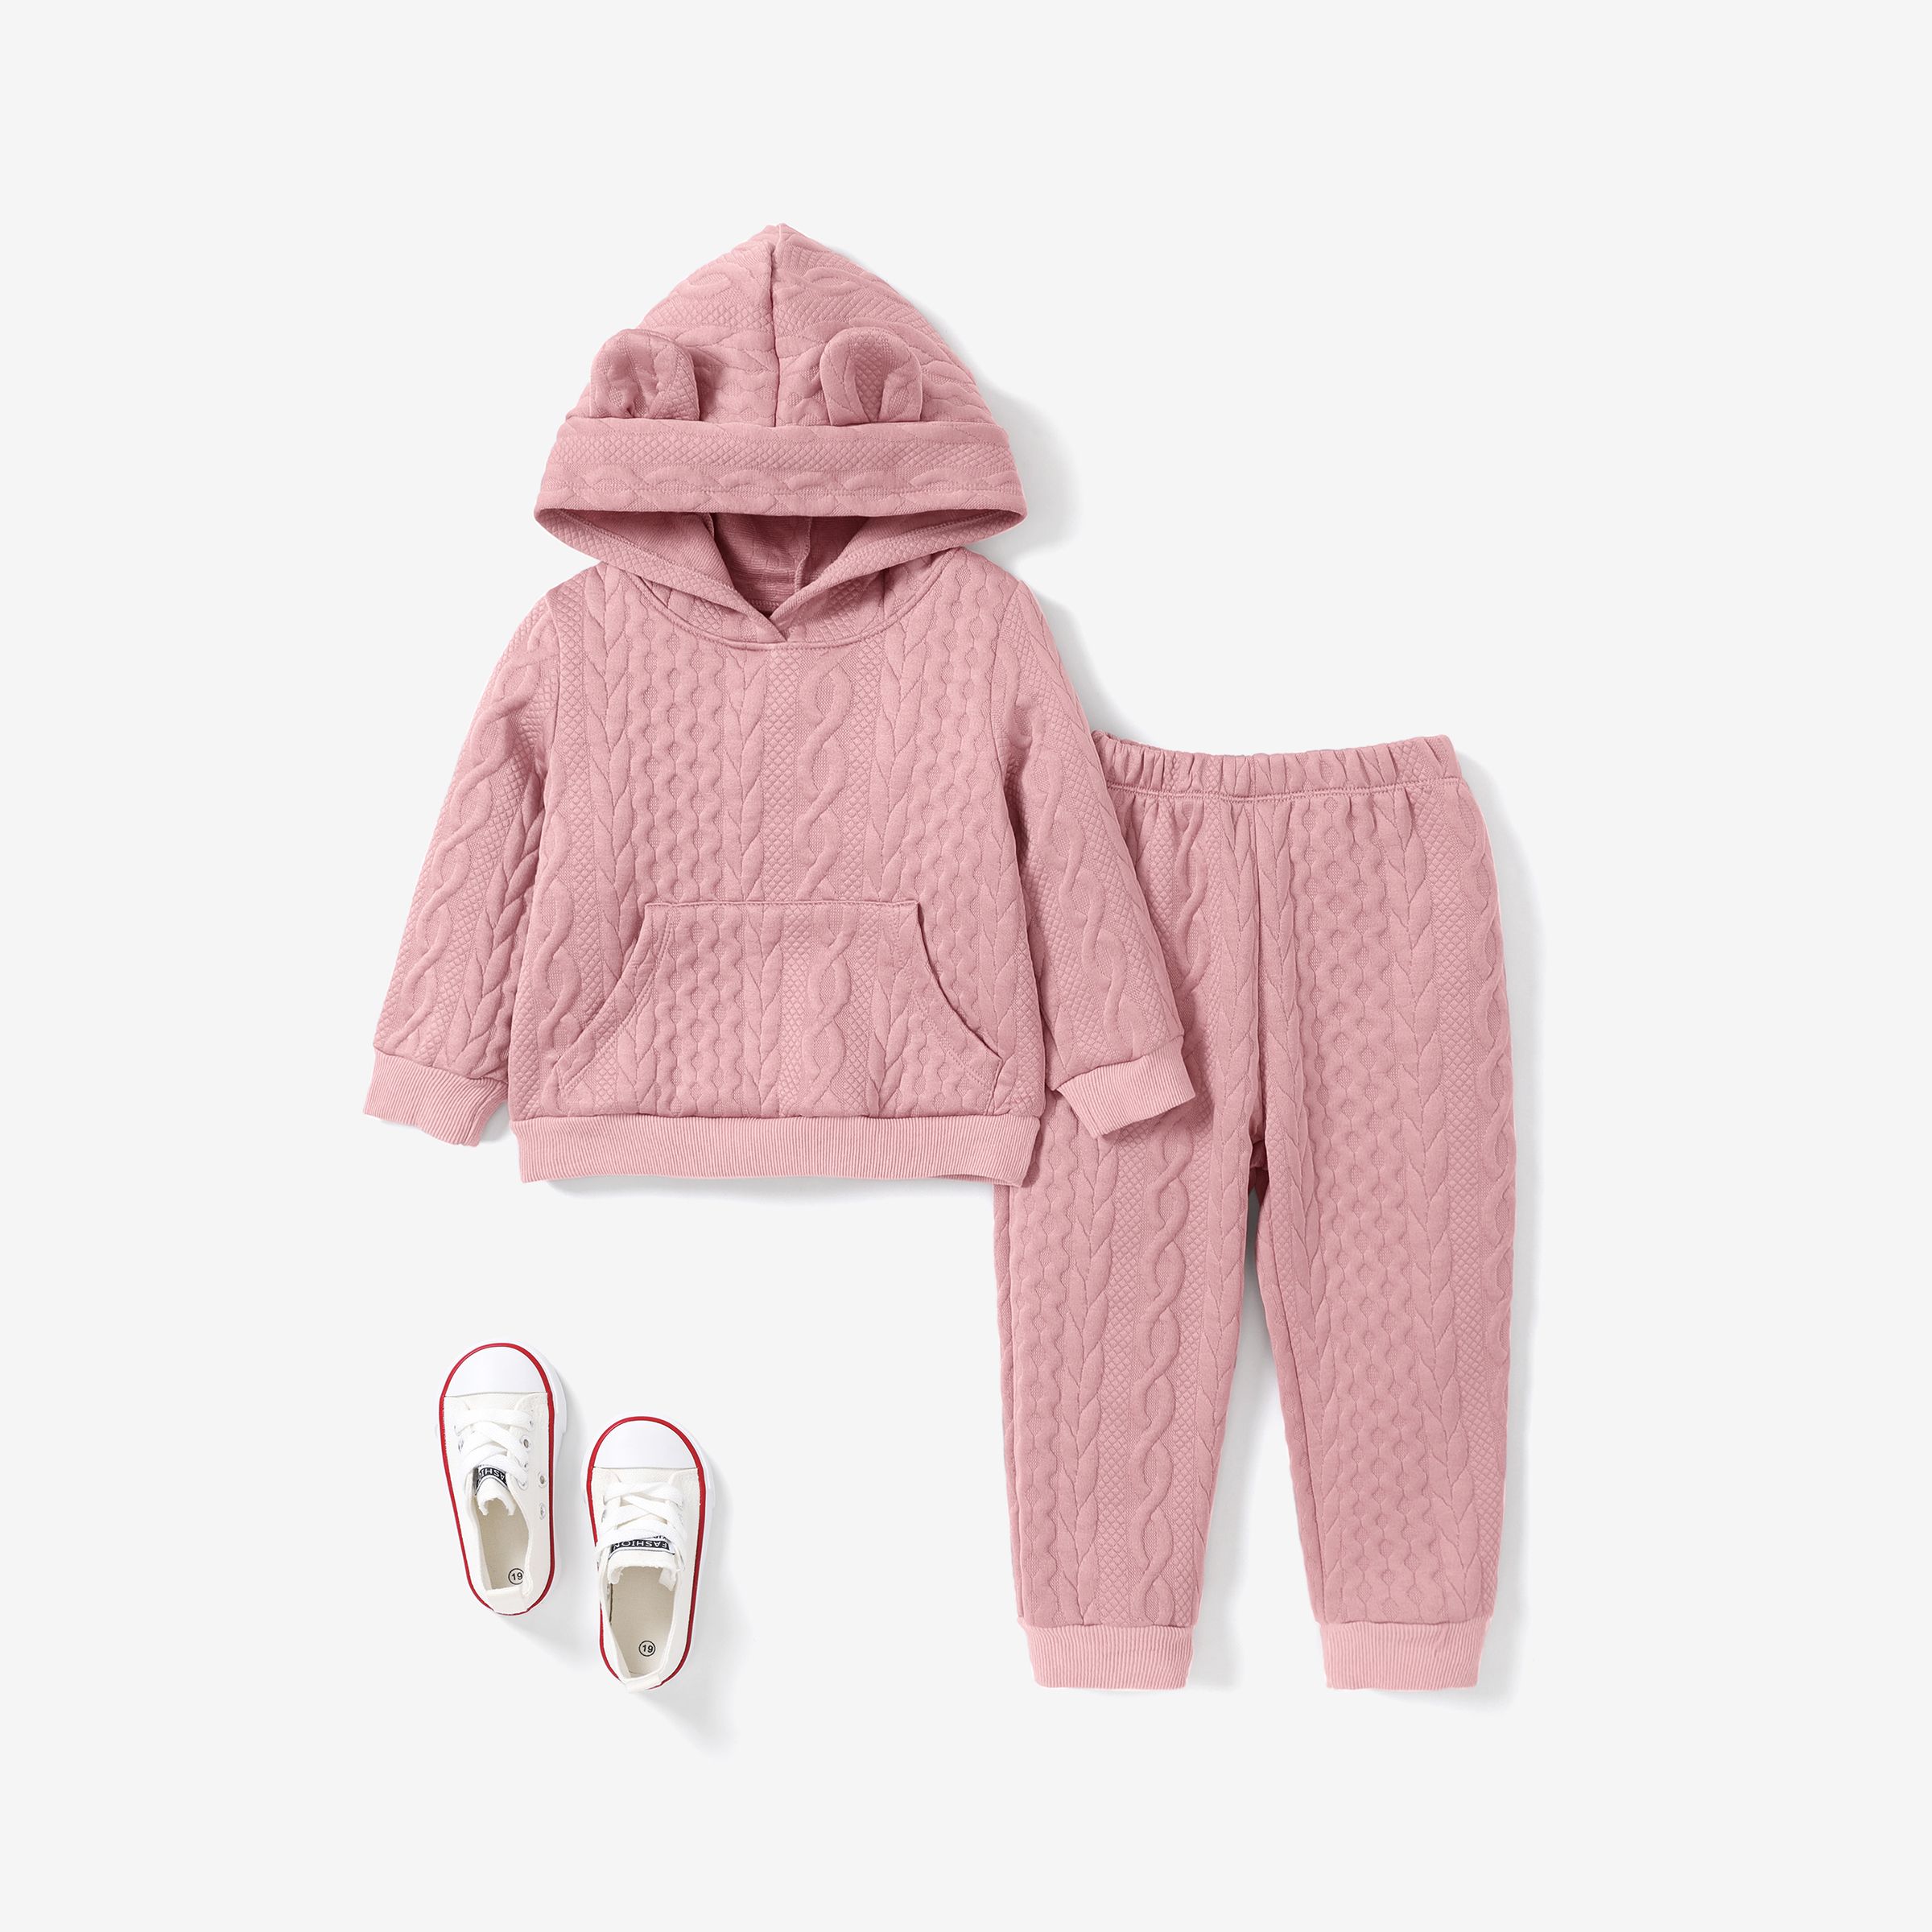 2pcs Toddler Girl's Solid Color Textured Material Hooded Causal Set With Cute Ear Design